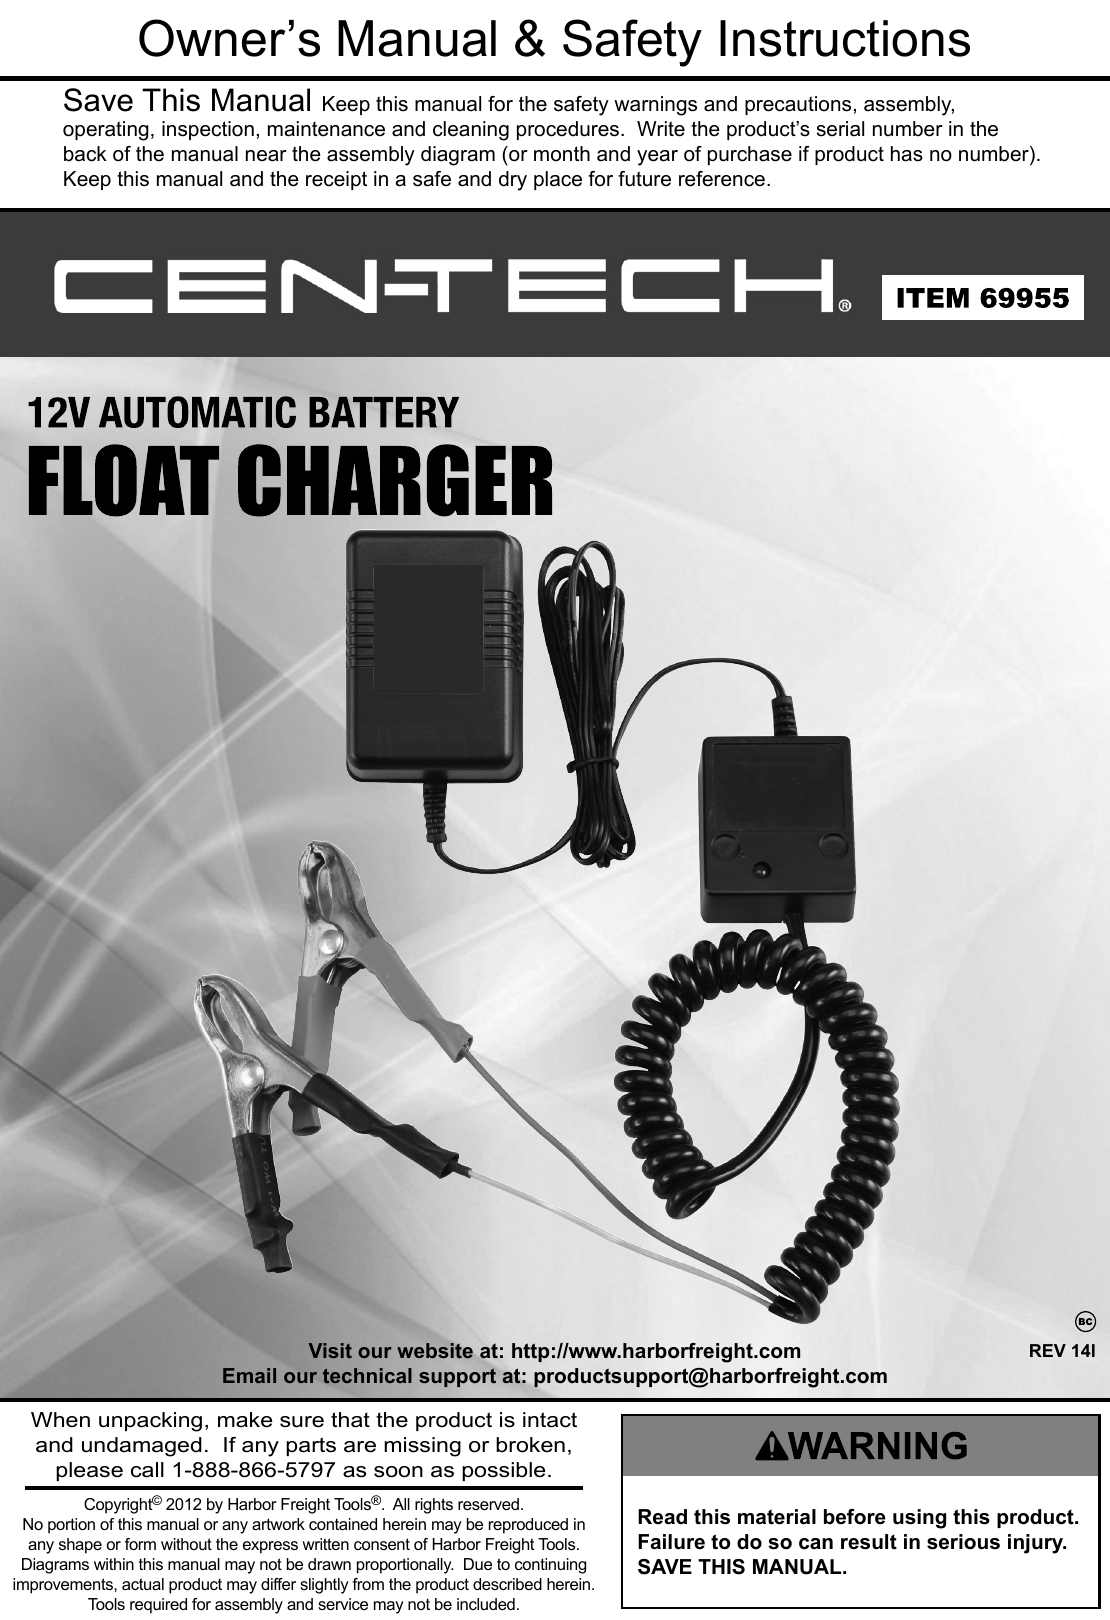 Page 1 of 4 - Manual For The 69955 Battery Float Charger, Automatic